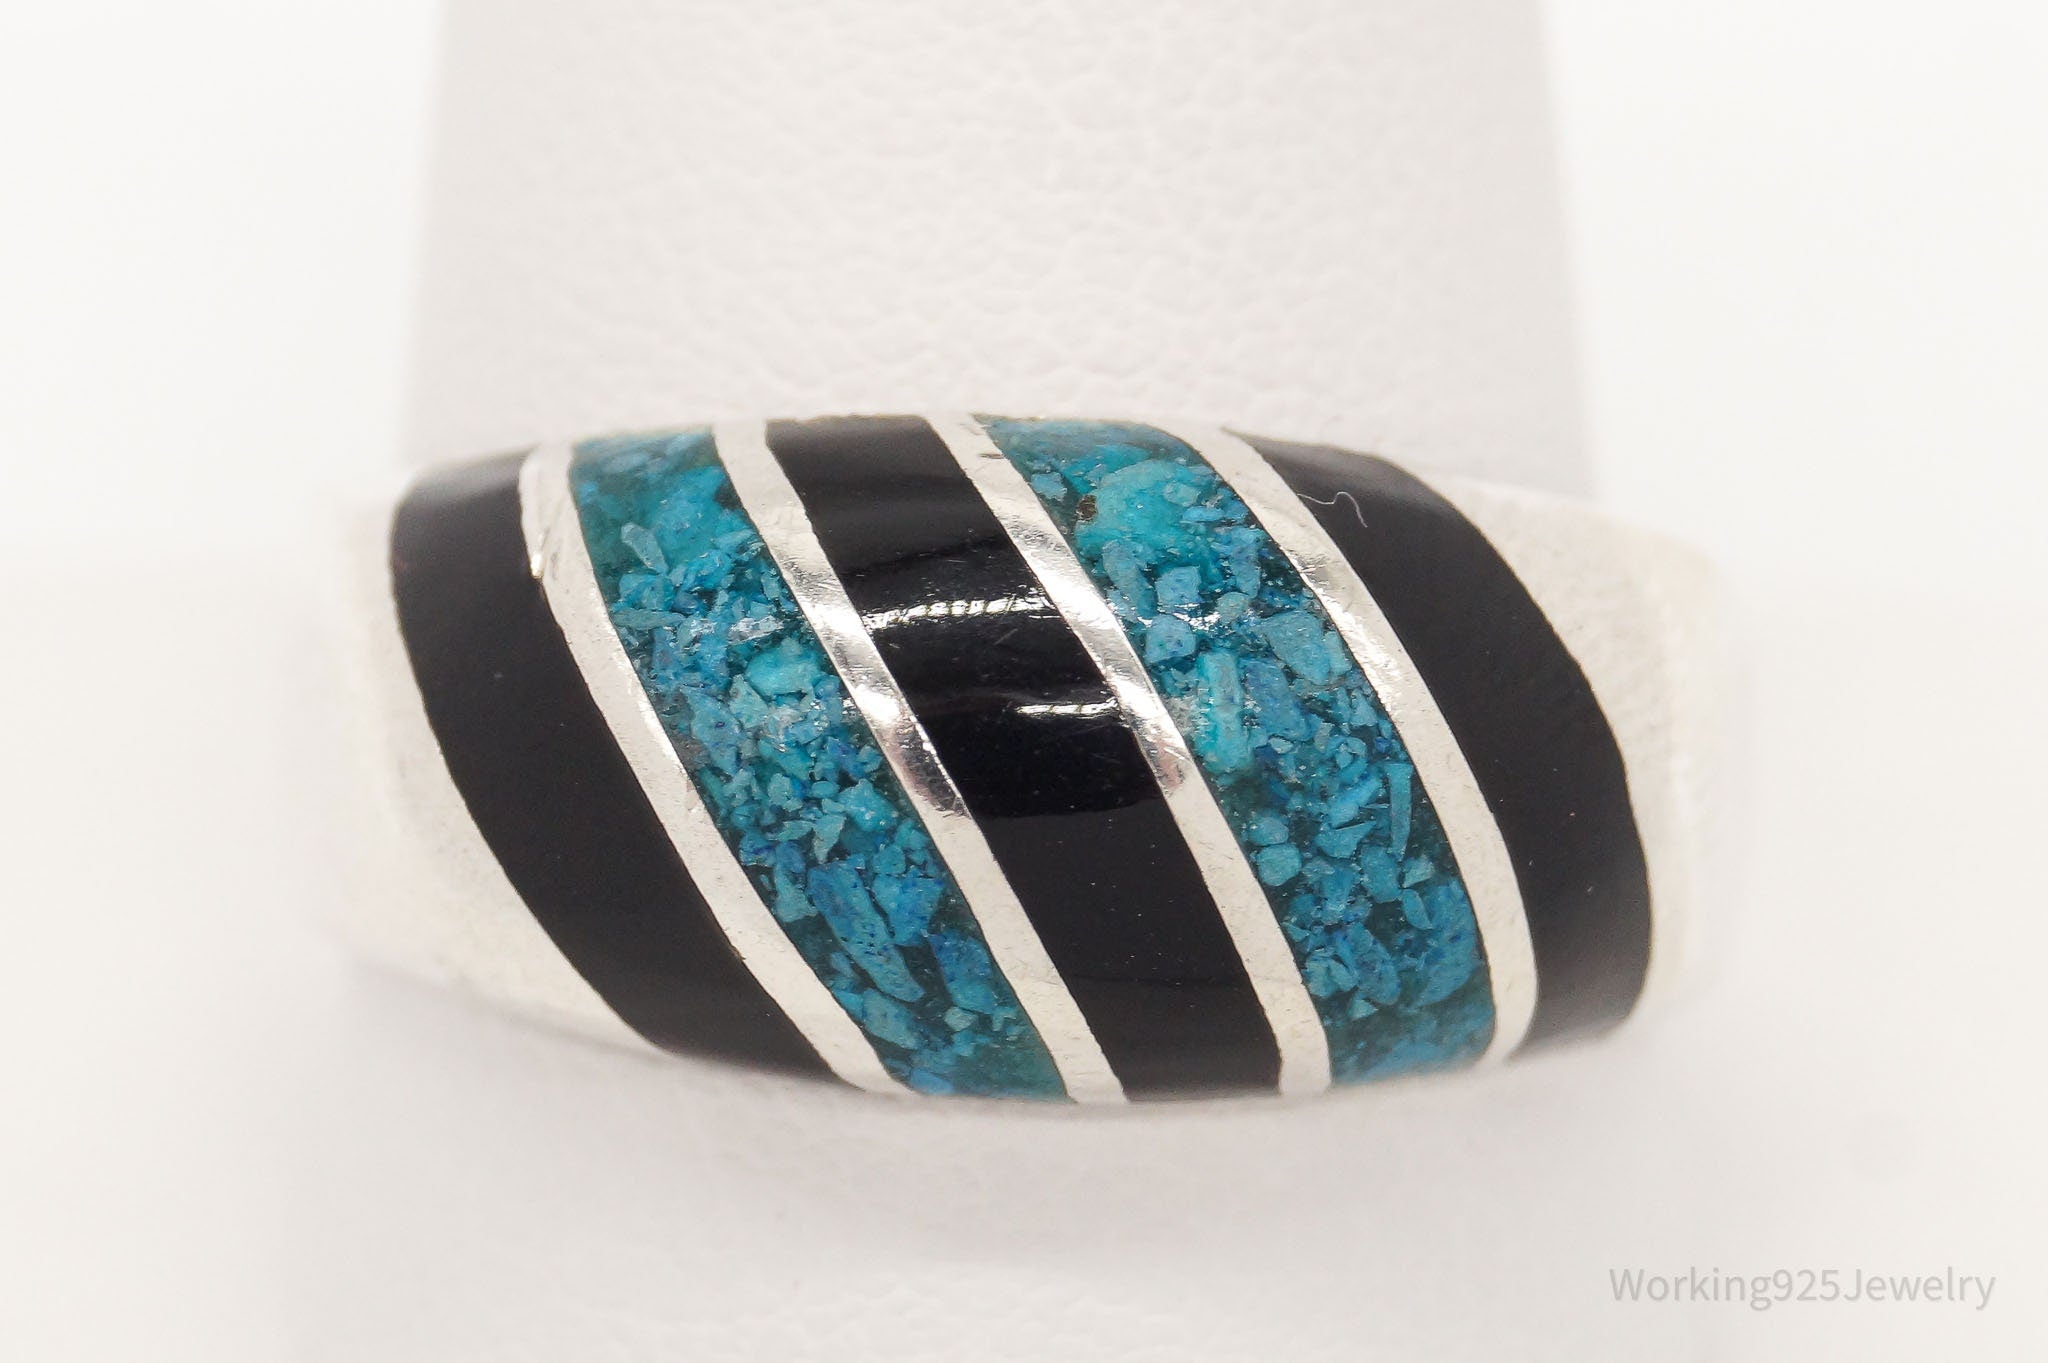 Vintage Mexico Blue Turquoise & Black Enamel Sterling Silver Ring - SZ 11.5